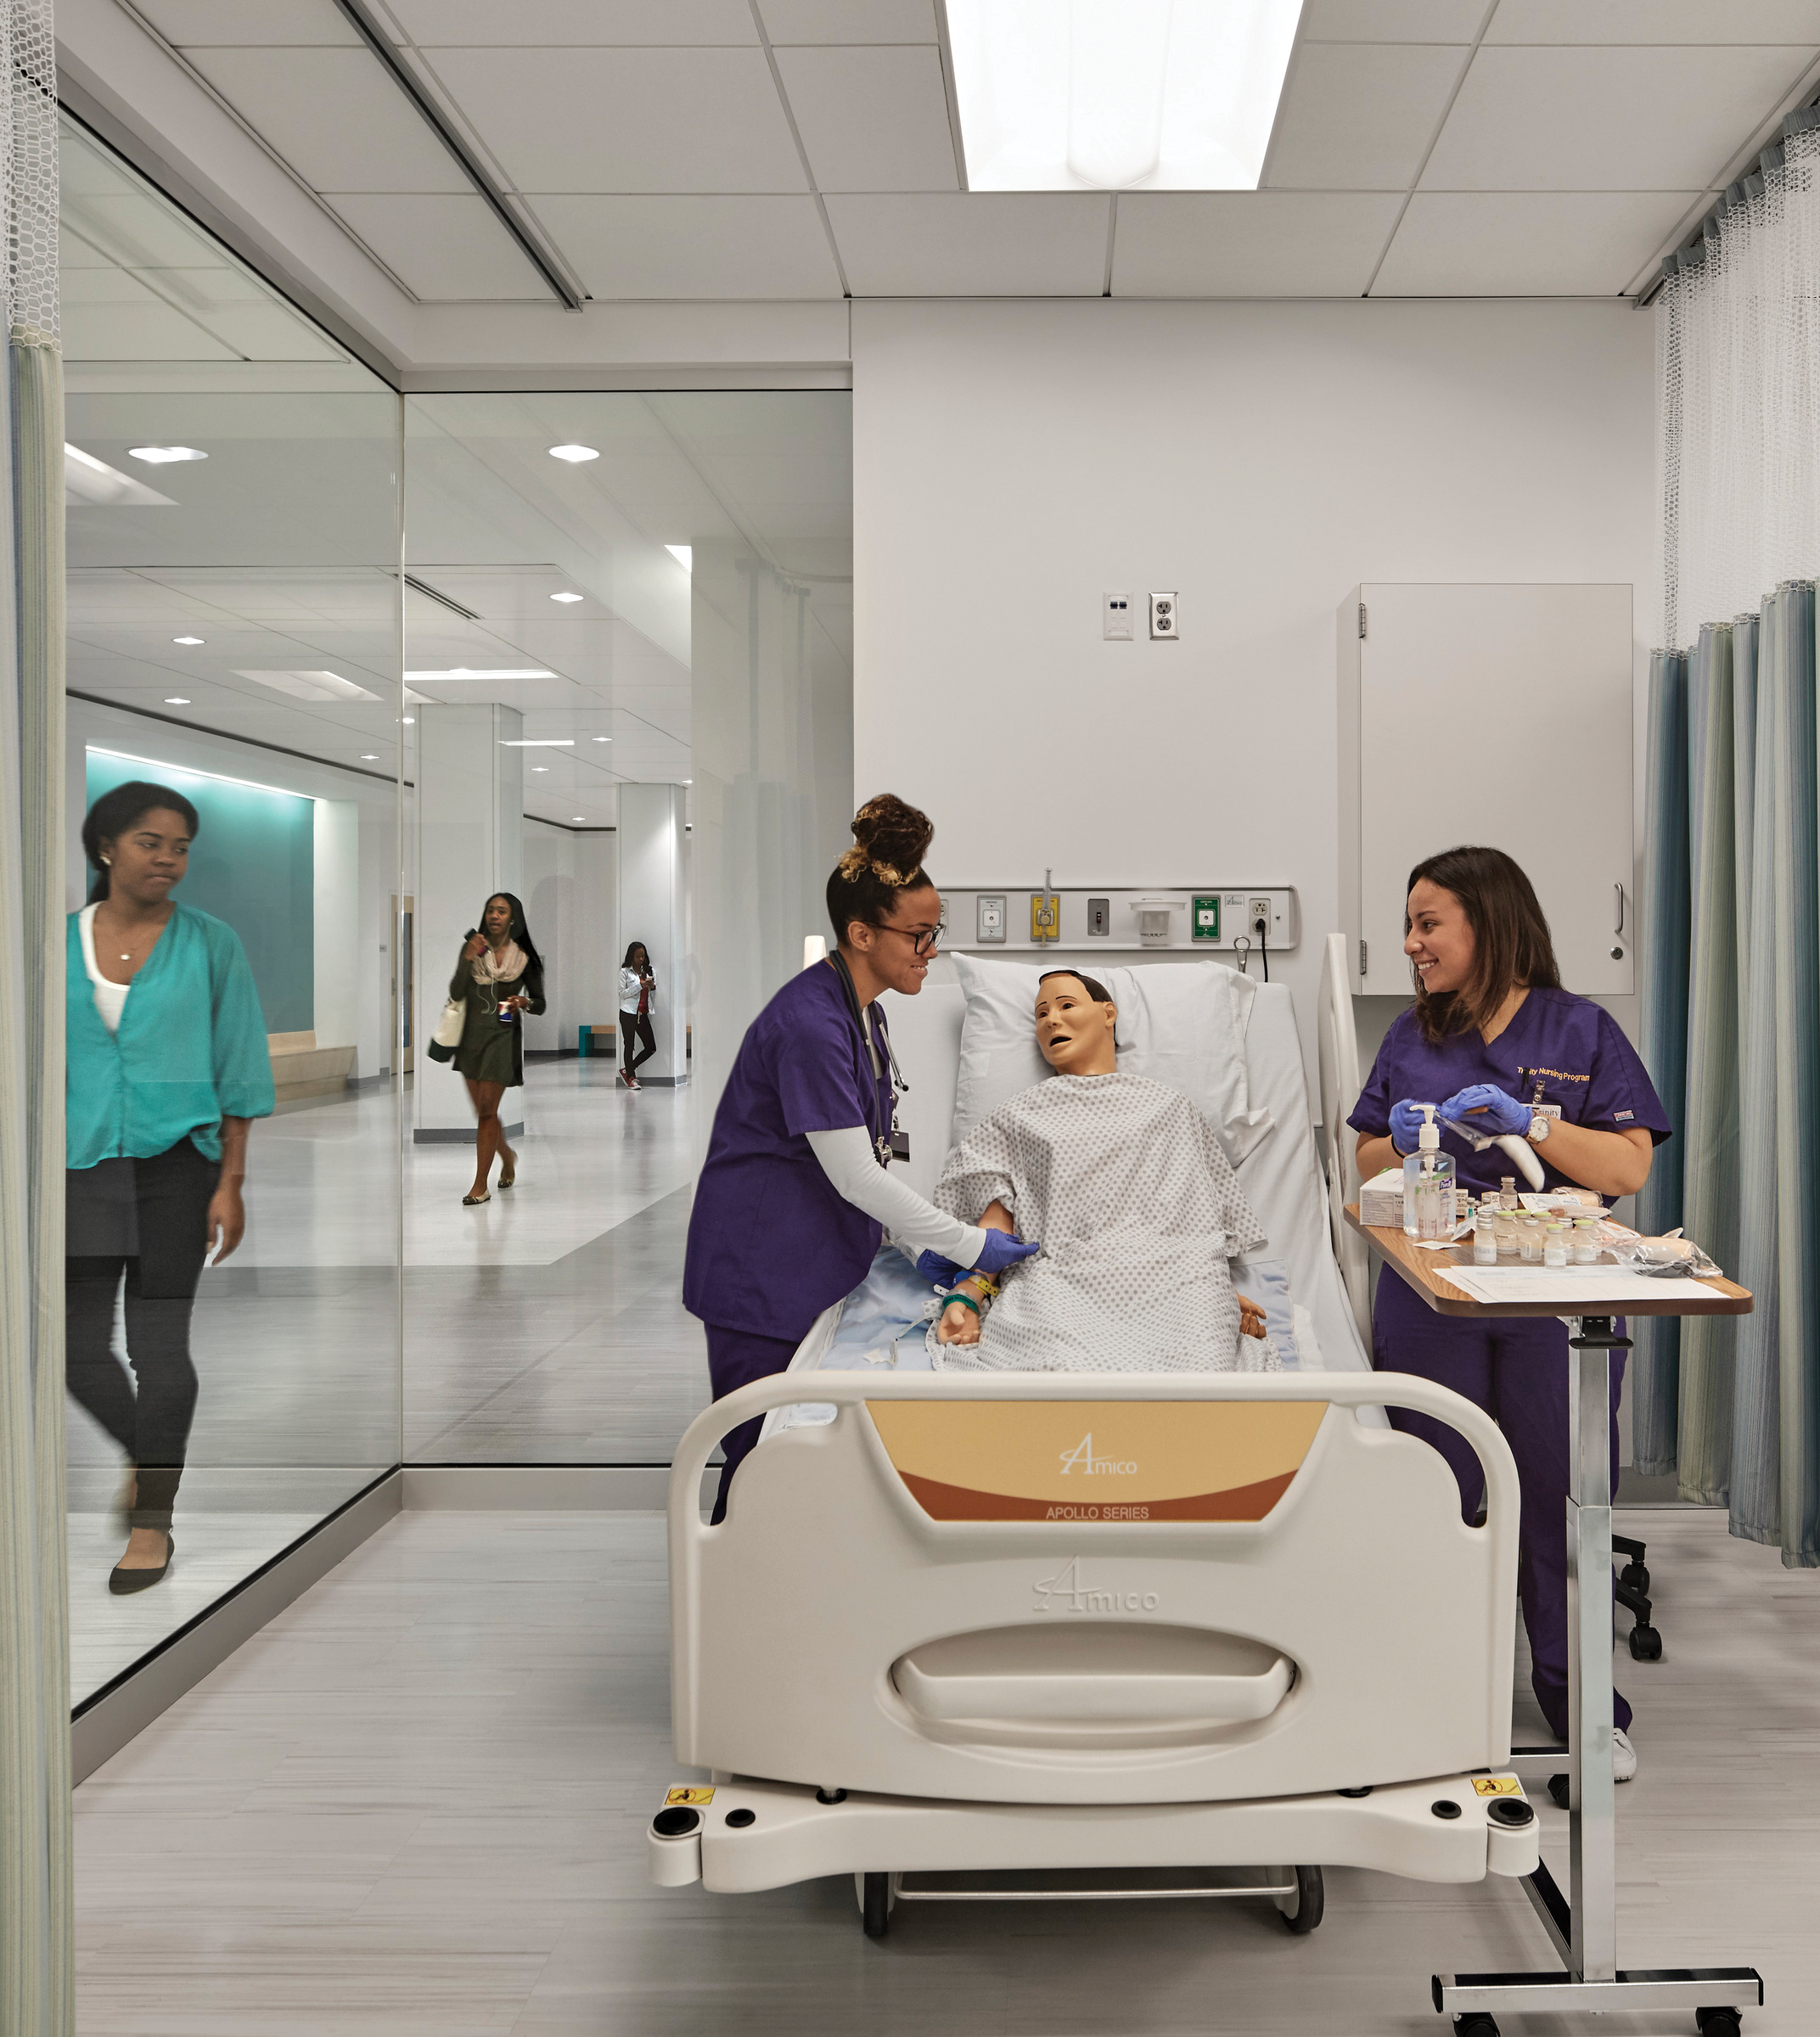 An open acute care skills practice space at the Trinity Washington University’s Payden Academic Center is openly accessible for “come-back” time, where students can practice skills.